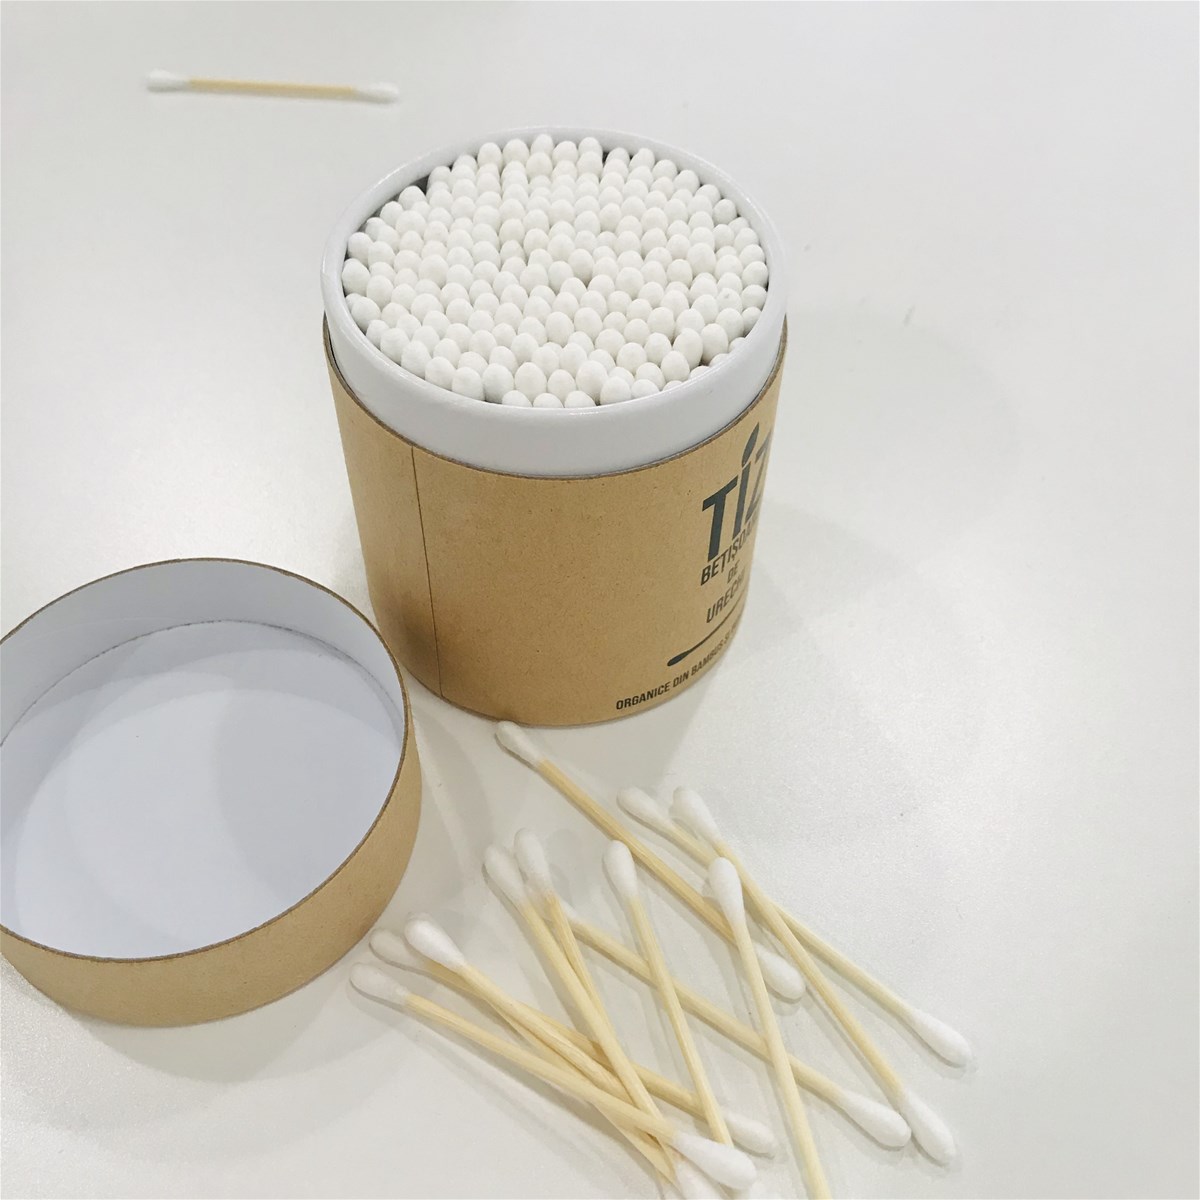 PlasticFree 100 Biodegradable Bamboo Cotton buds for Ear Cleaning cylinder box Customized Logo